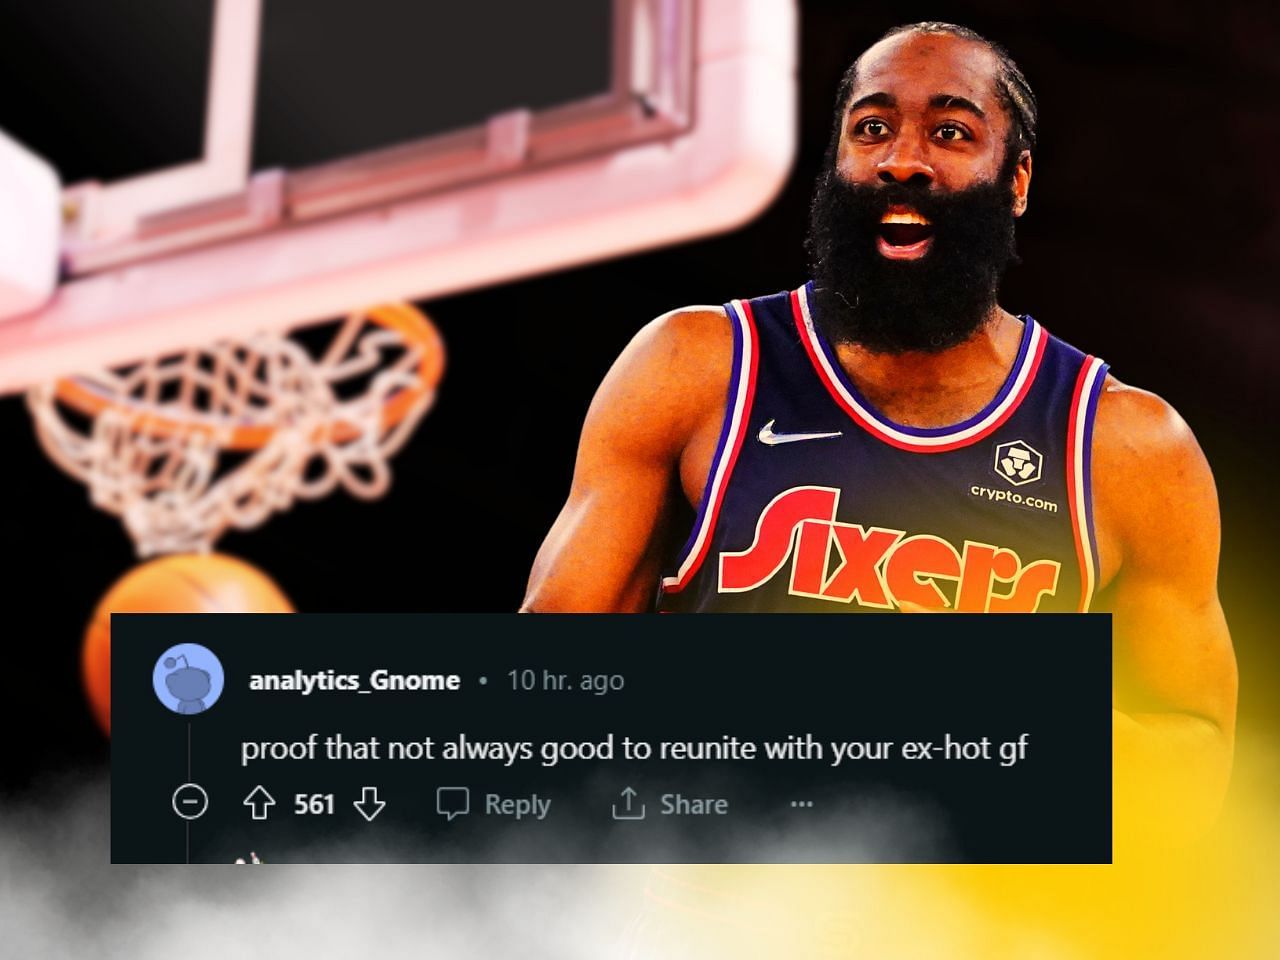 James Harden is turning up the malcontent as the Sixers refuse to trade him.